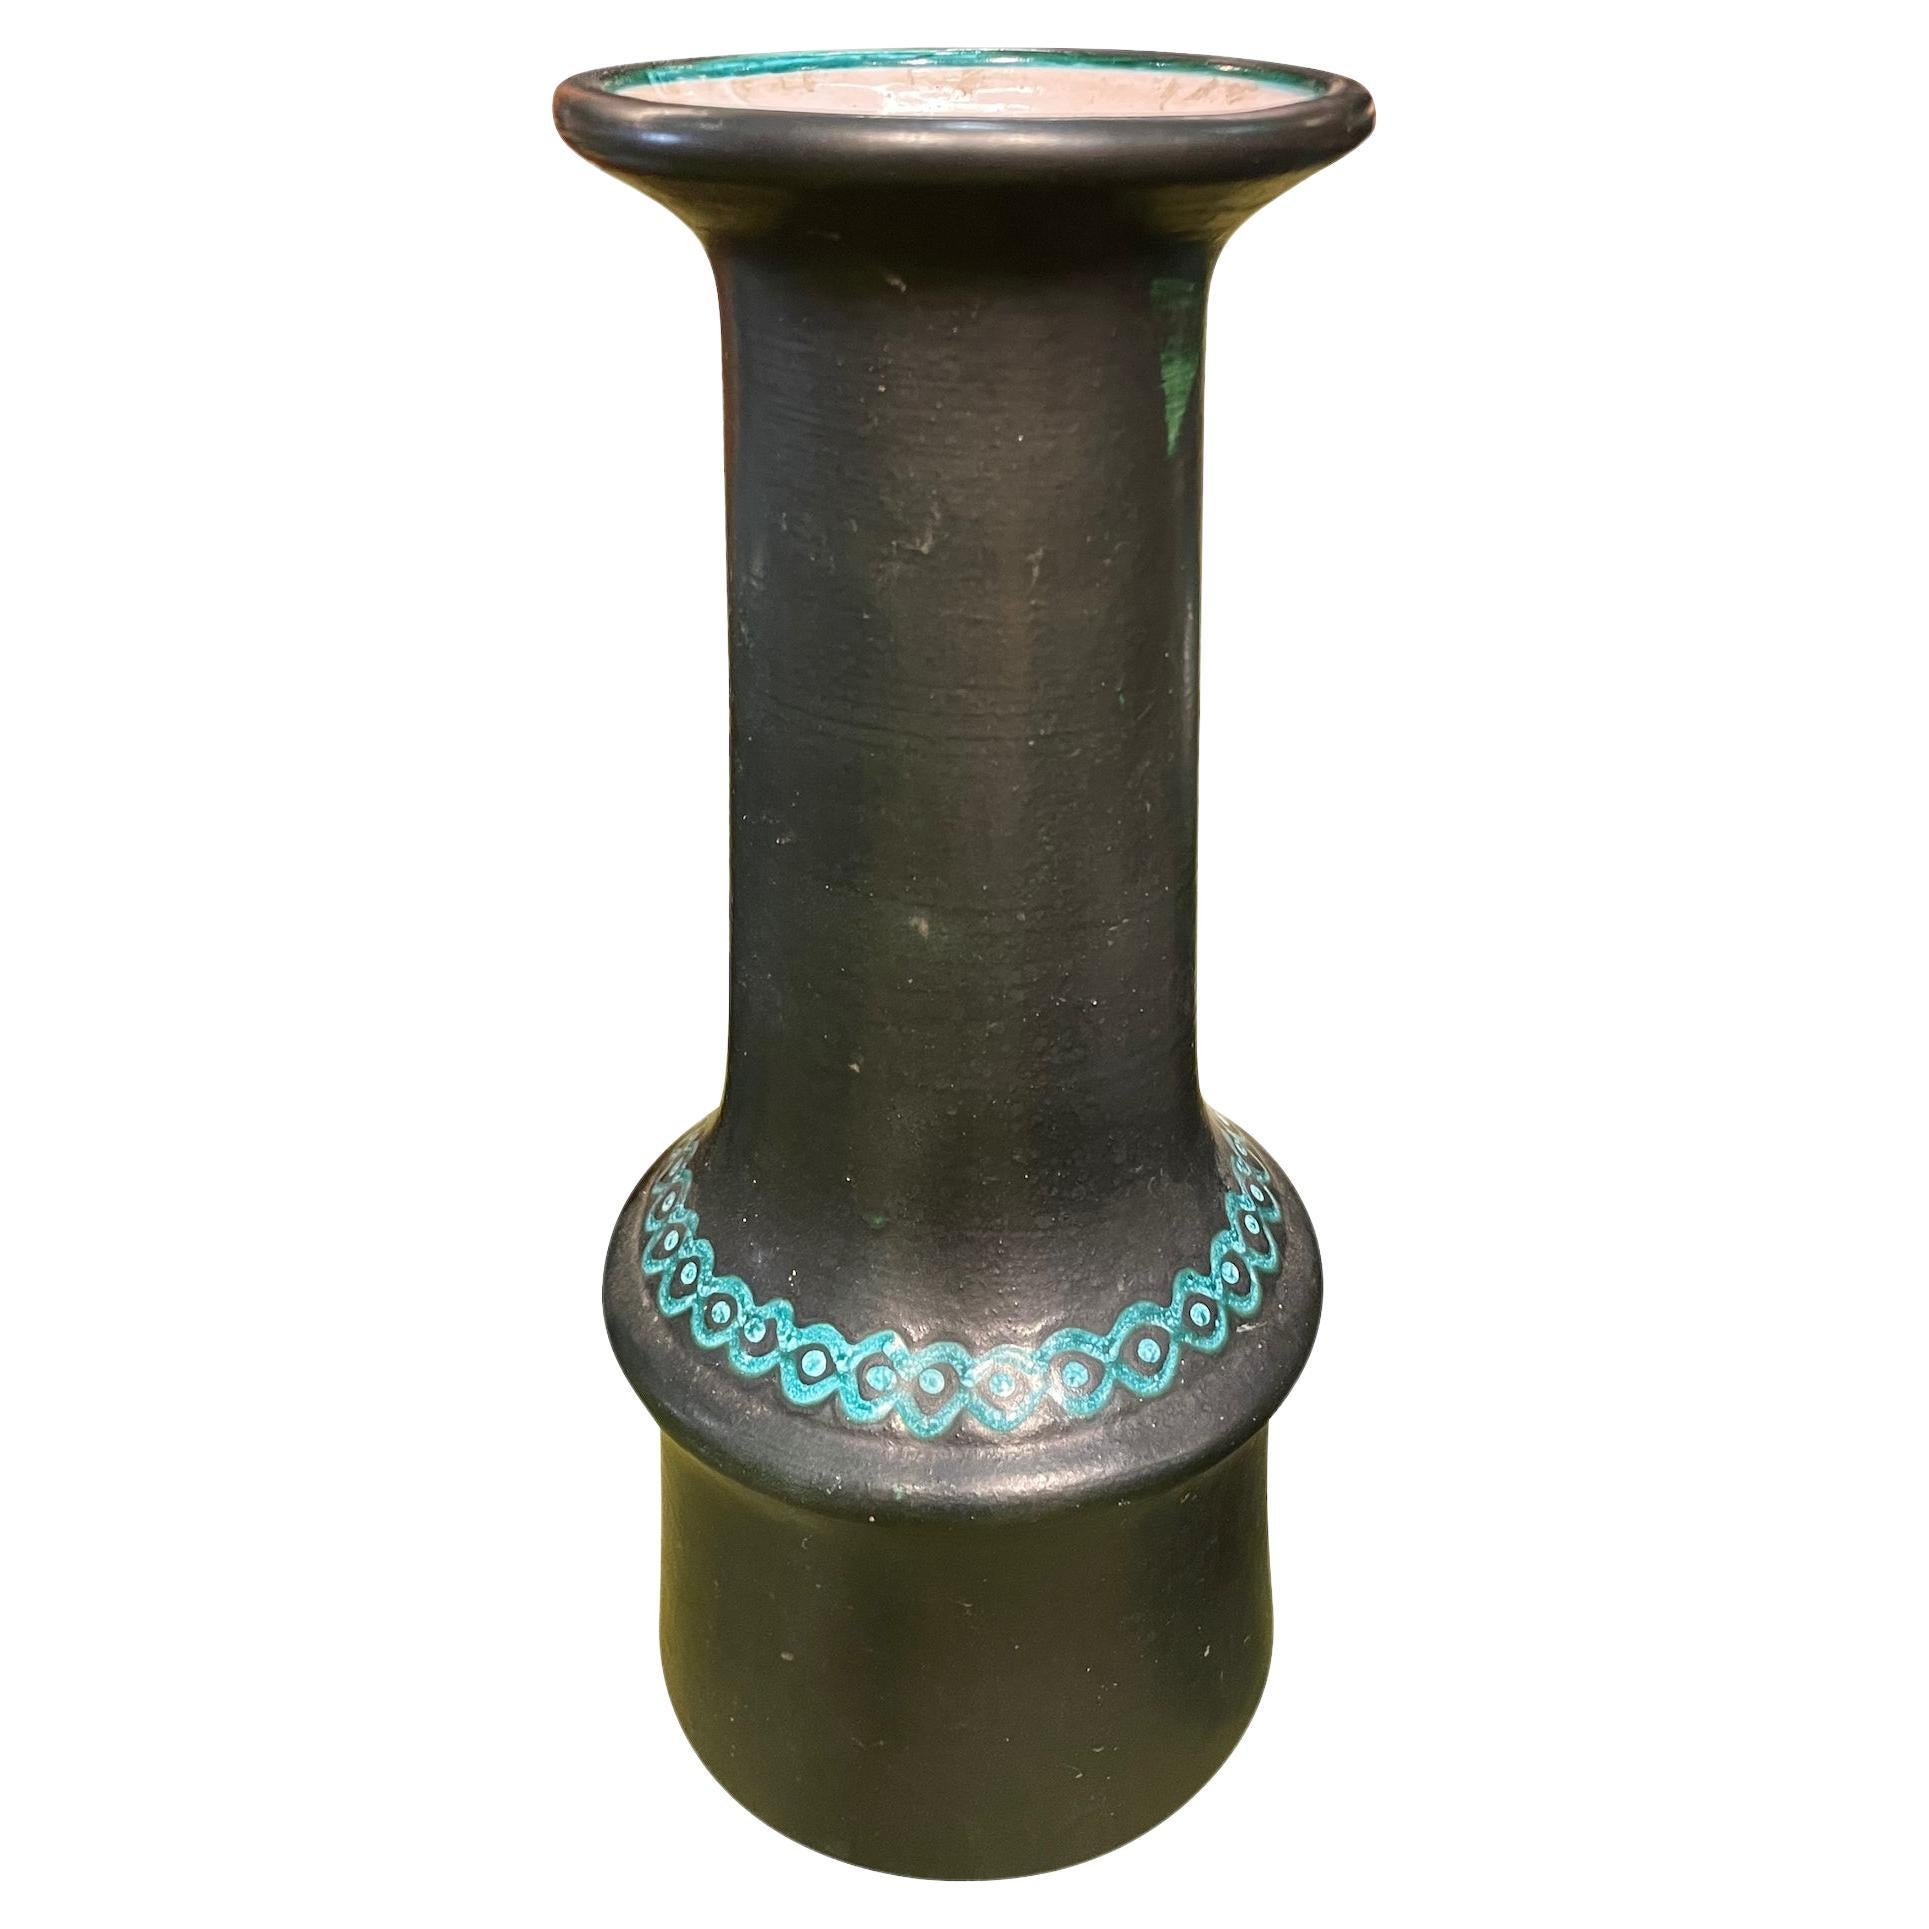 Italian Mid Century solid black glaze vase with turquoise decorative stripe detail.
From a collection of varying sizes and shapes.